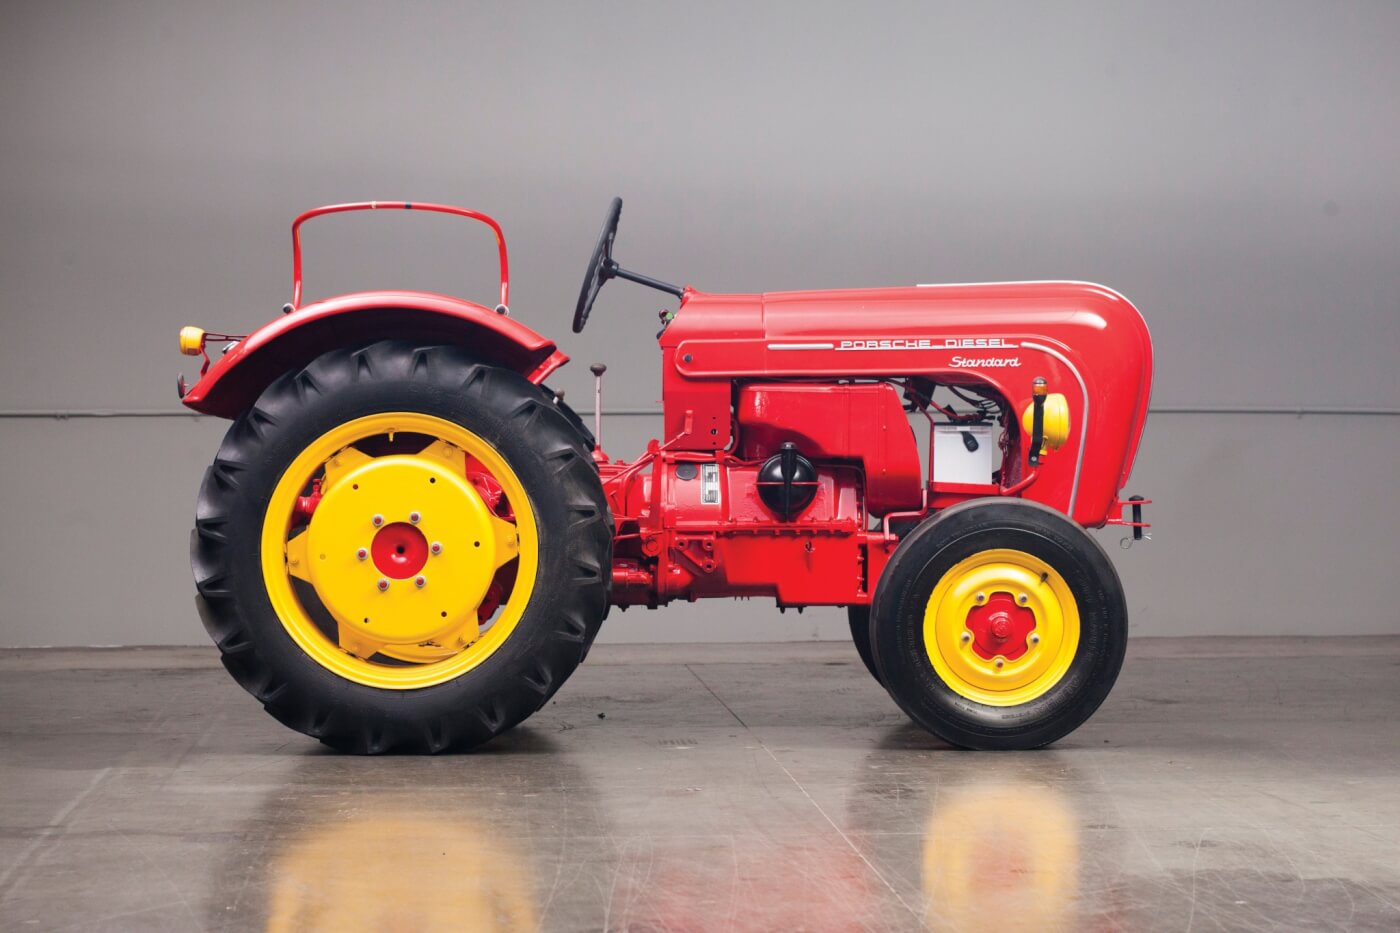 The Porsche-Diesel Standard isn’t a big tractor but was designed to be versatile. It was an adjustable tread tractor, with a wheel track spacing adjustable from 49 to 73 inches. If the front wheels look familiar, think Volkswagen. The tractor used a five speed manual from ZF and had reduction gears in a portal style final drive. One of the unique features in the Porsche-Diesel tractor was a hydraulic coupling. It operated much like a torque converter, and you only needed the foot clutch for gear changes. The hydraulic coupling provided a load-sensing device that worked as an automatic torque amplifier. Wheel weights were available, but we don’t have specs on what was the maximum amount for the Standard. They also used liquid in the tires.